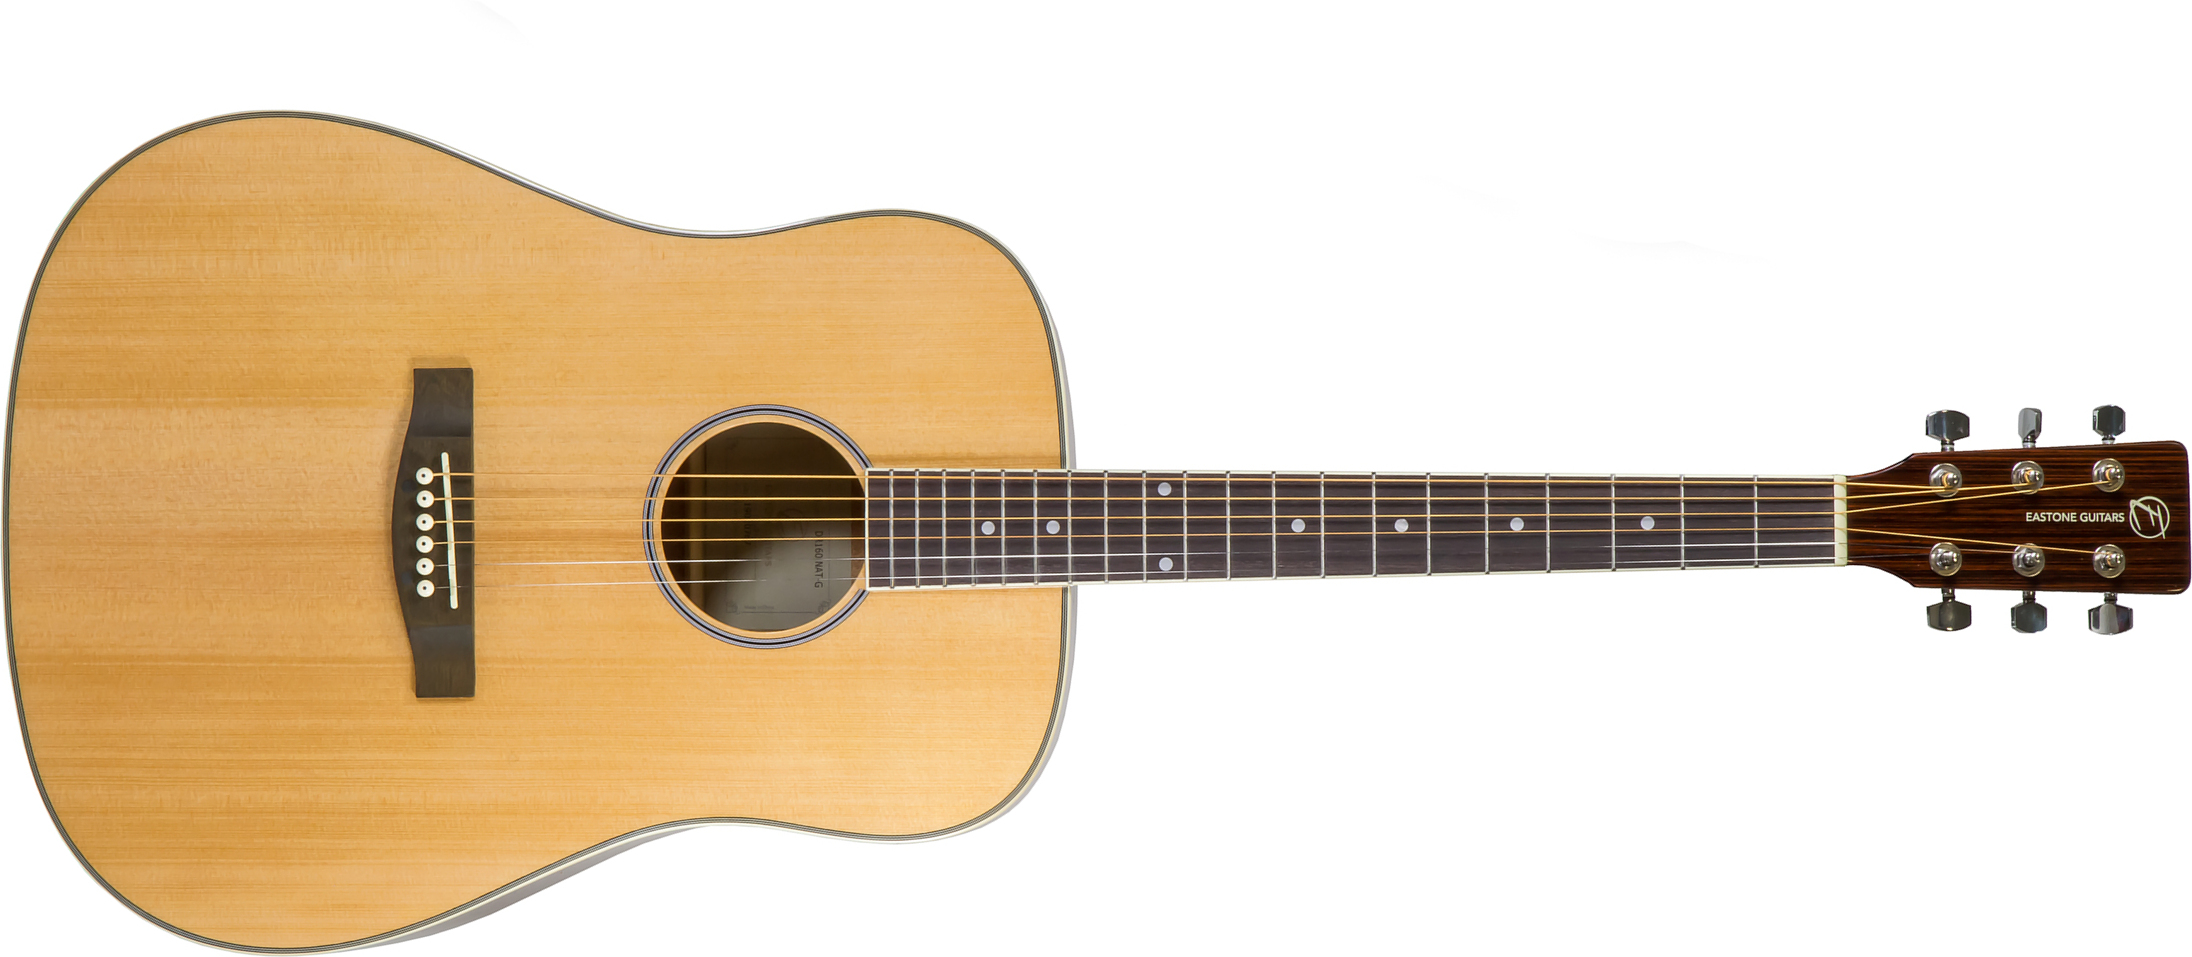 Eastone Dr160-nat-g Dreadnought Cw Epicea Wenge - Natural Gloss - Acoustic guitar & electro - Main picture